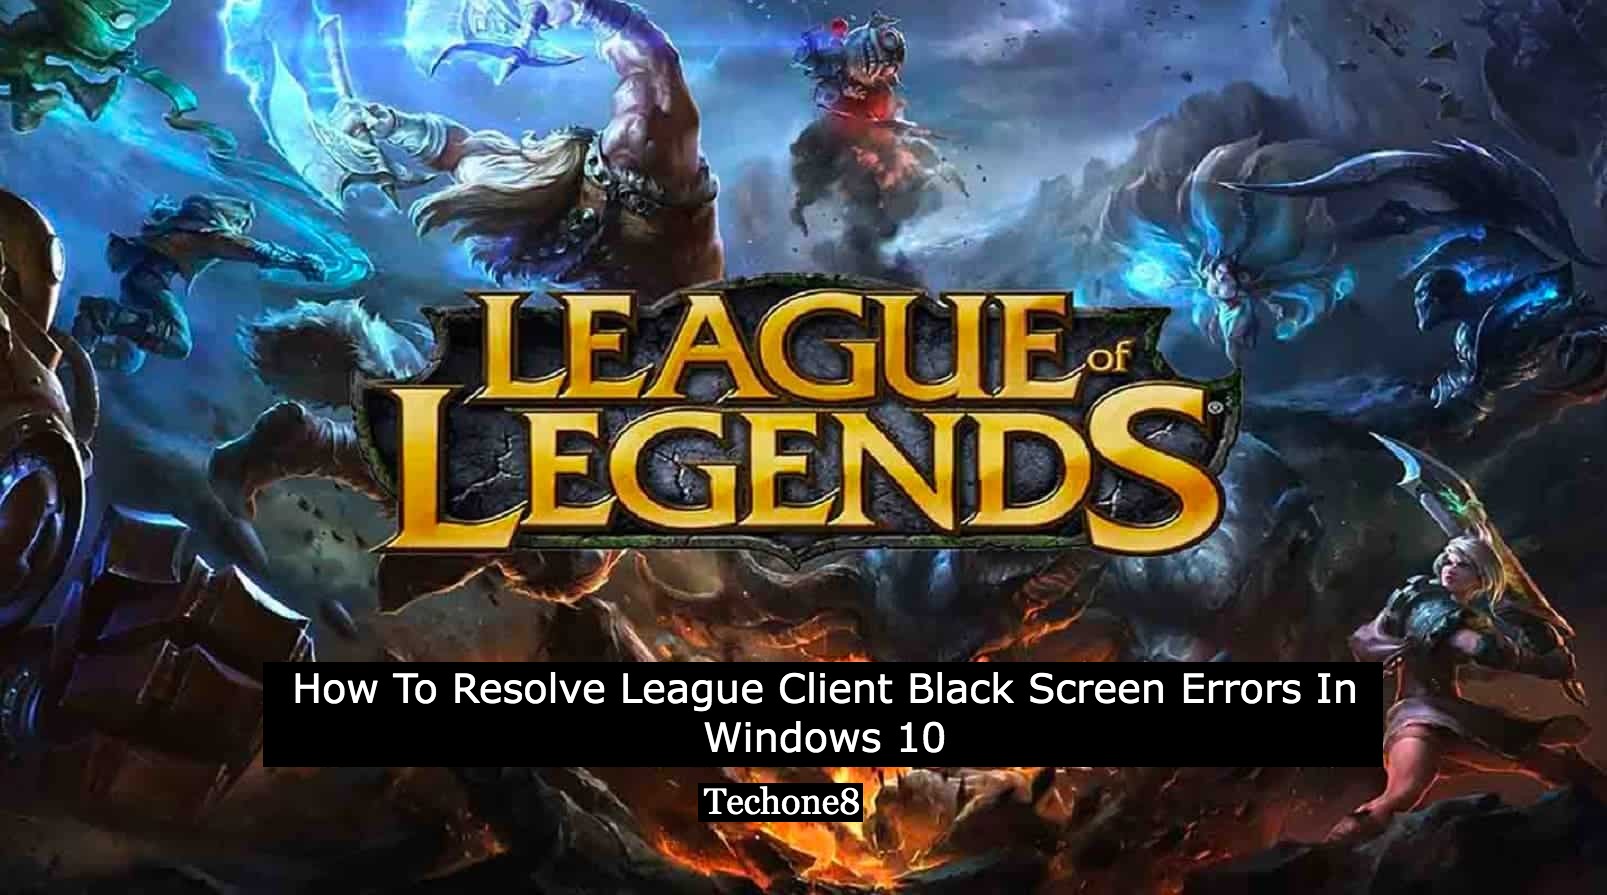 How To Resolve League Client Black Screen Errors In Windows 10